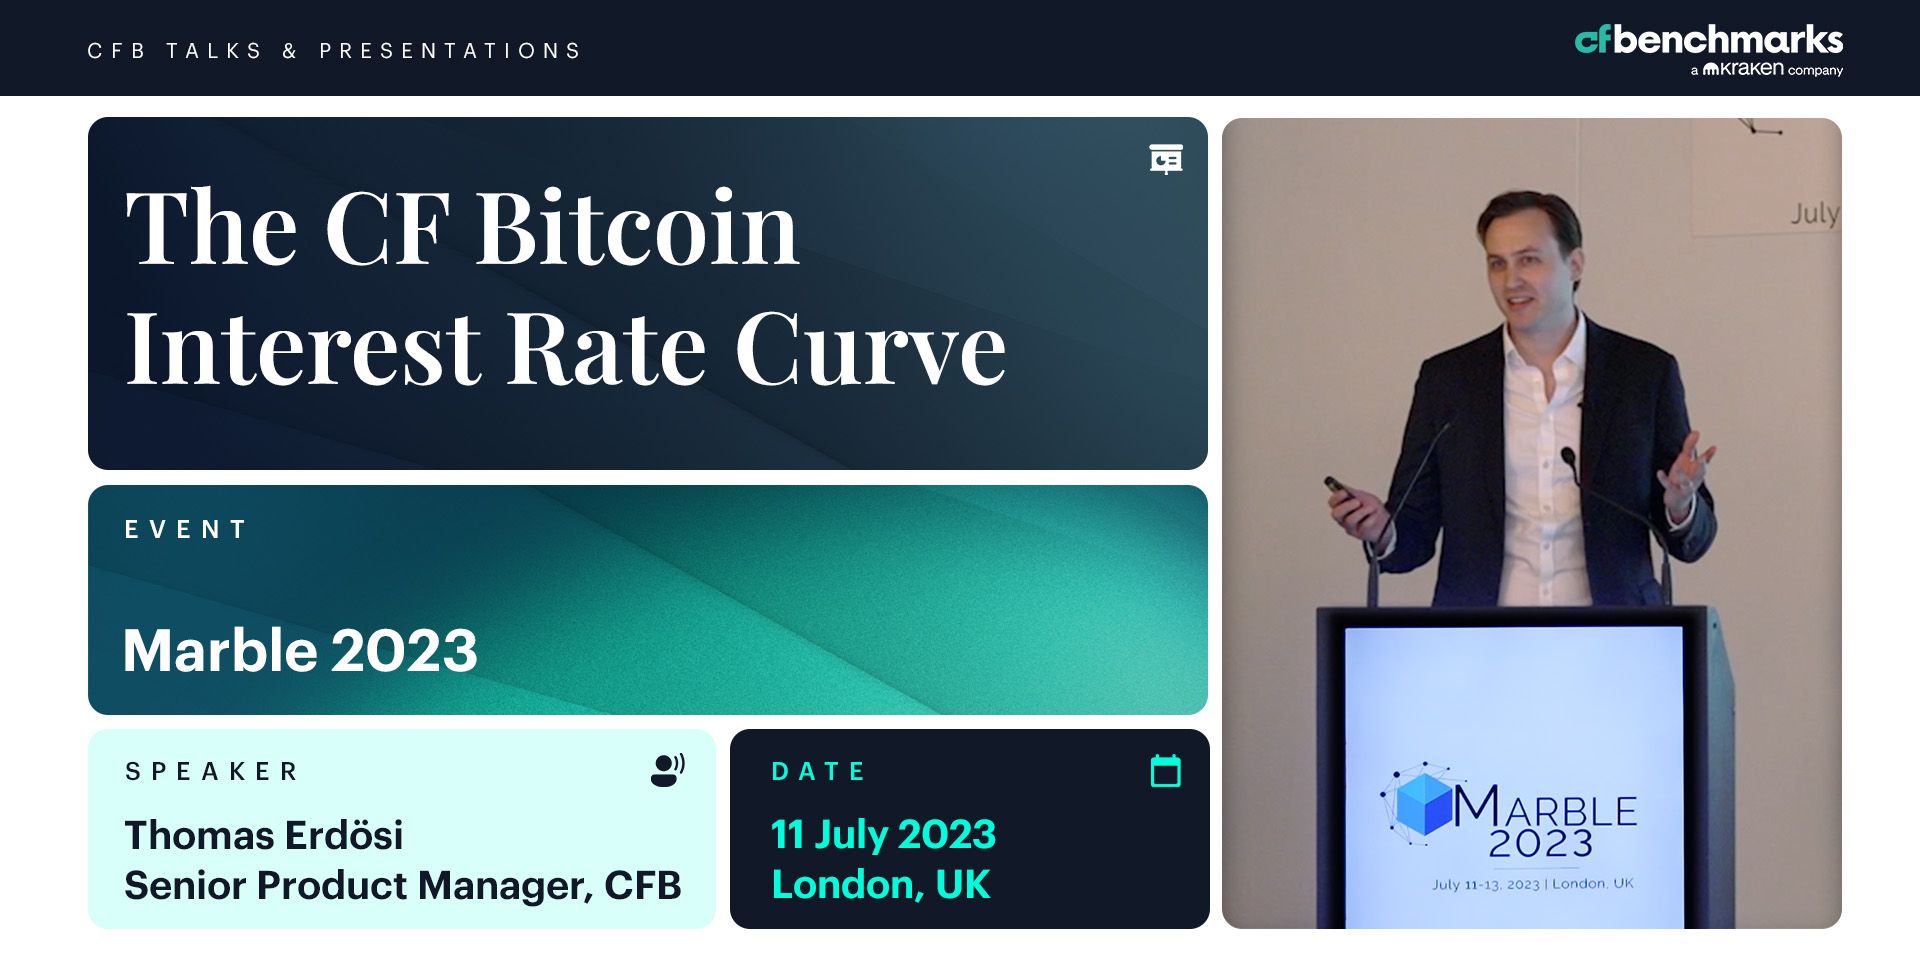 CF Bitcoin Interest Rate Curve: Marble 2023 Presentation